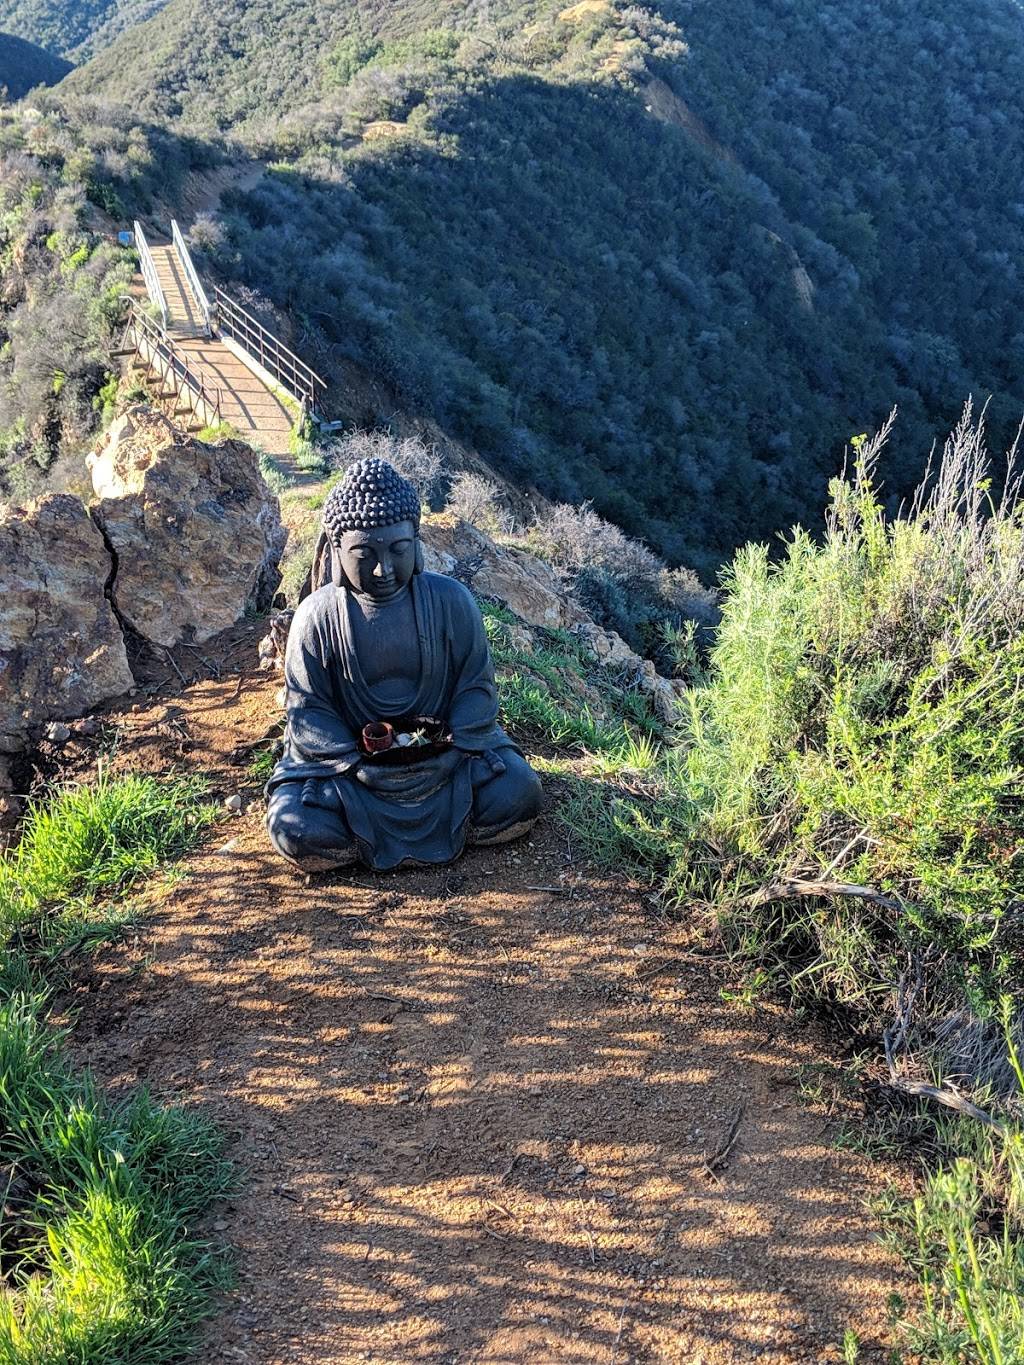 Peace symbol | Rogers Rd Trail, Pacific Palisades, CA 90272, USA